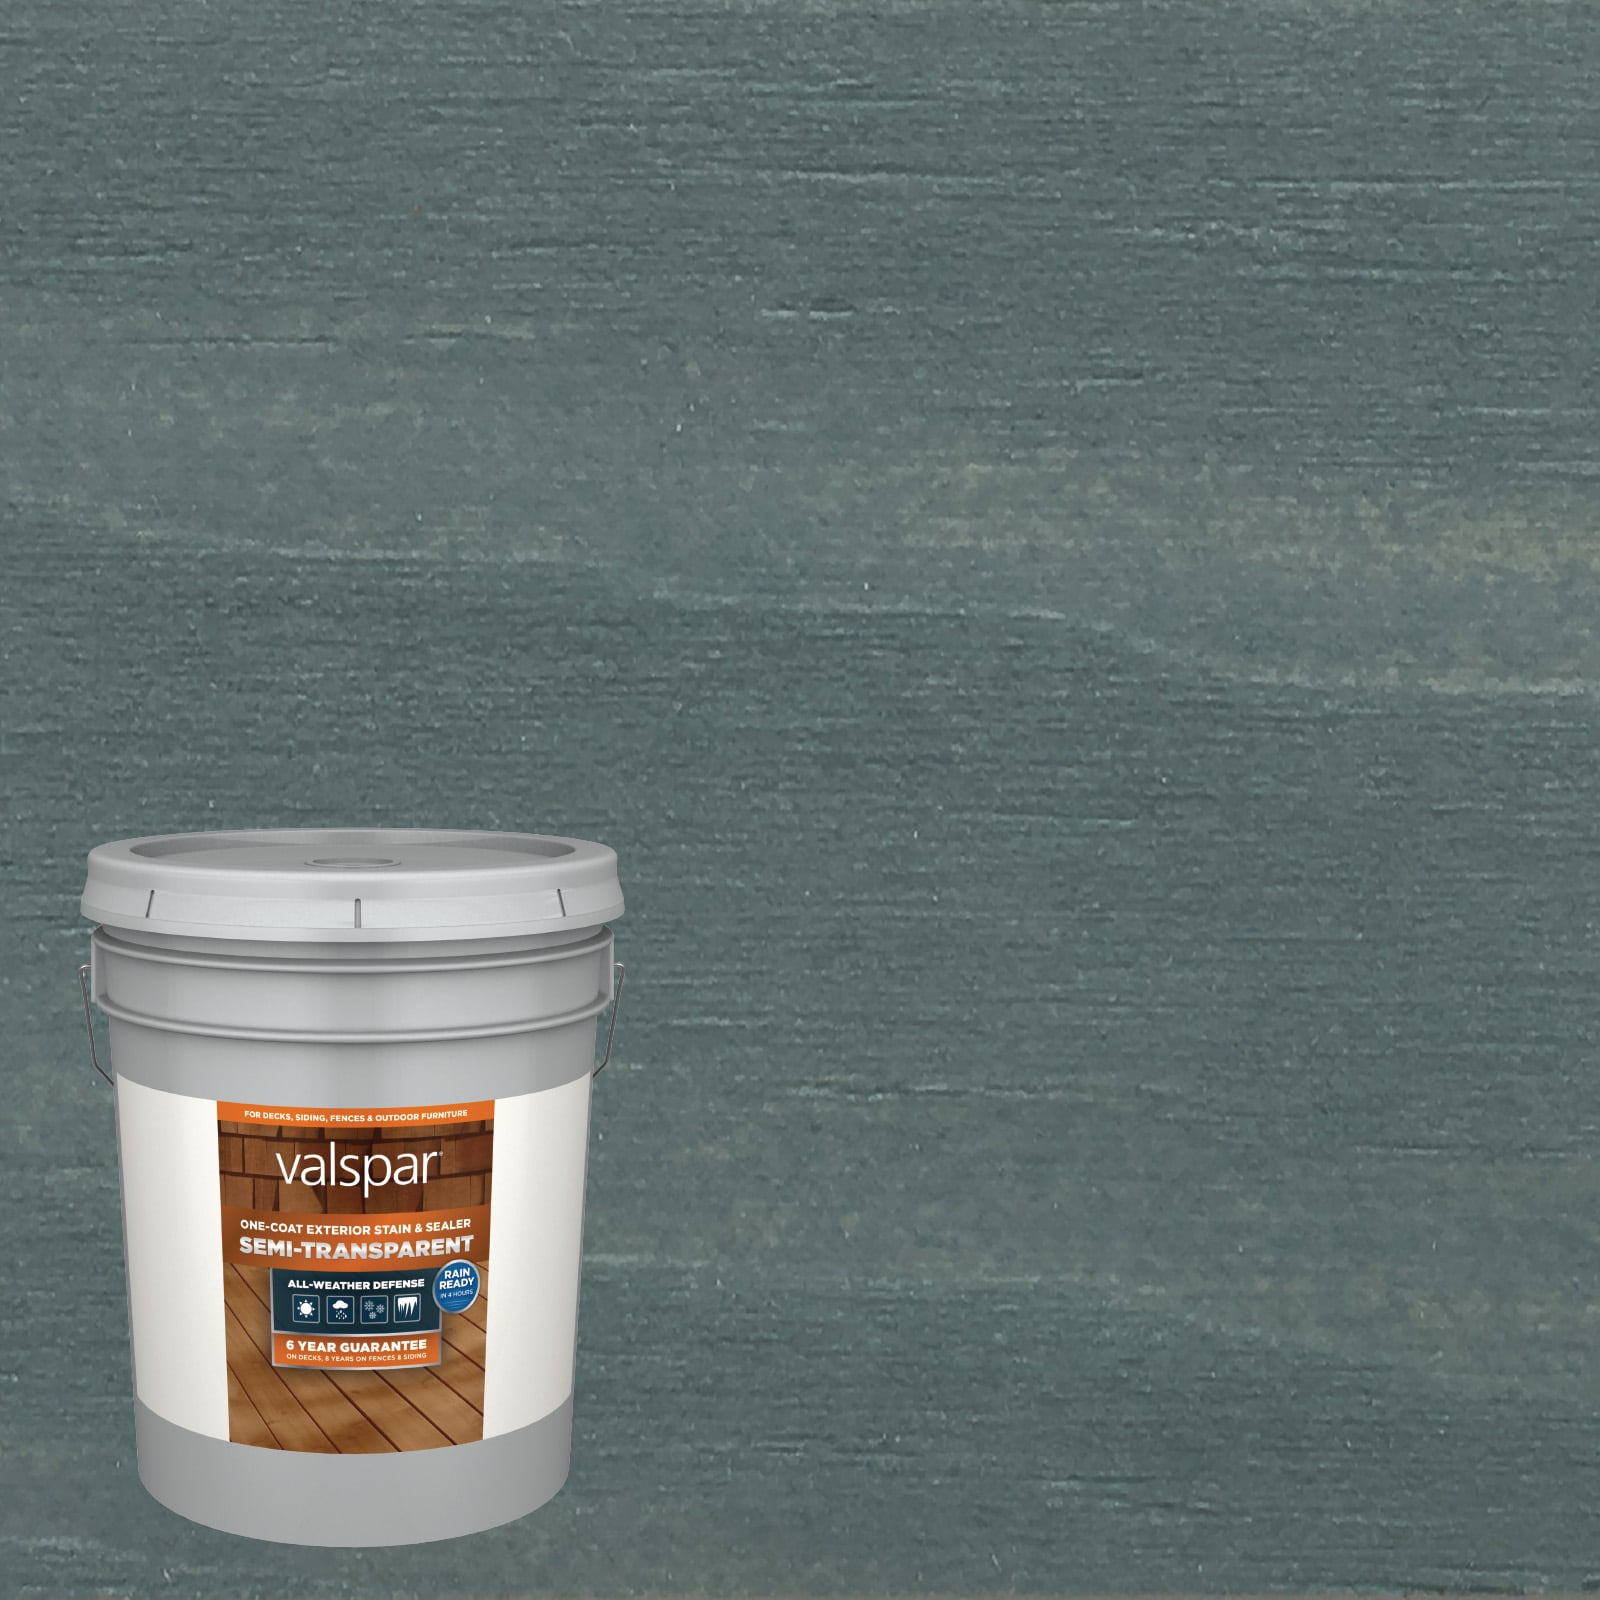 Valspar Cottage Gray Semi-transparent Exterior Wood Stain and